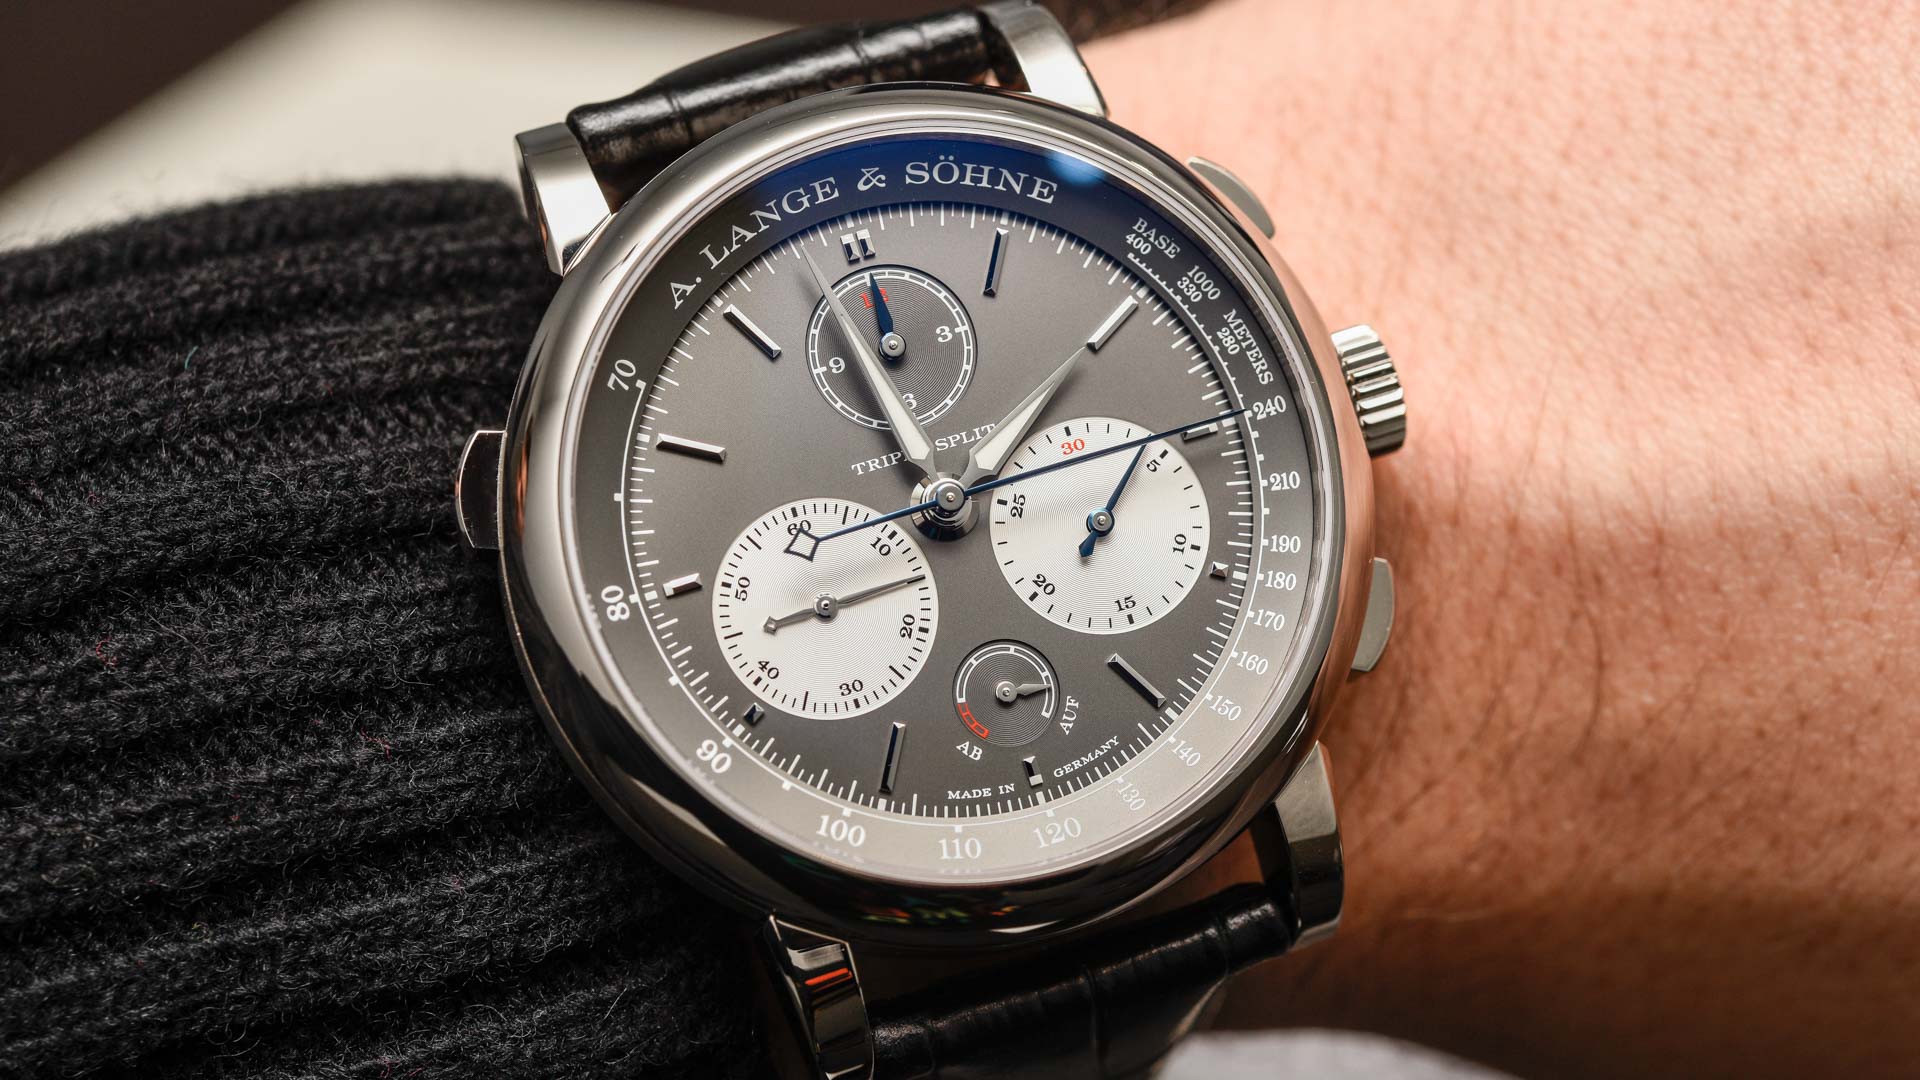 Hands-On With The Double Chronograph A. Lange & Söhne Triple Split Watch